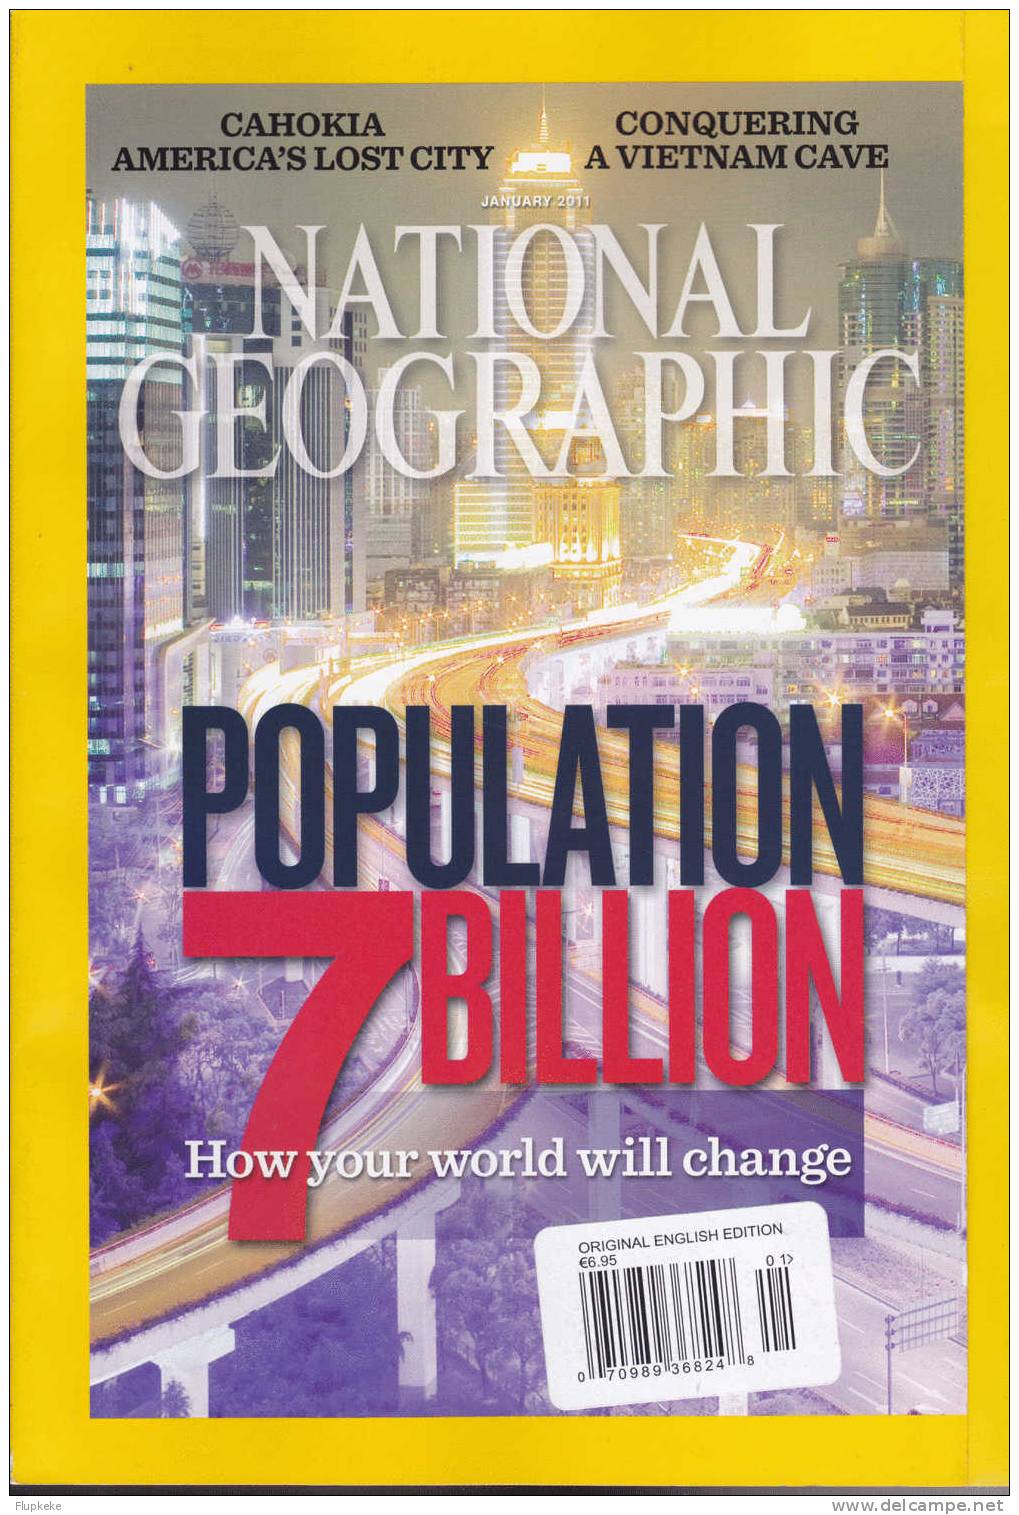 National Geographic U.S. January 2011 V219 No1 Population 7 Billion How Your World Will Change - Travel/ Exploration